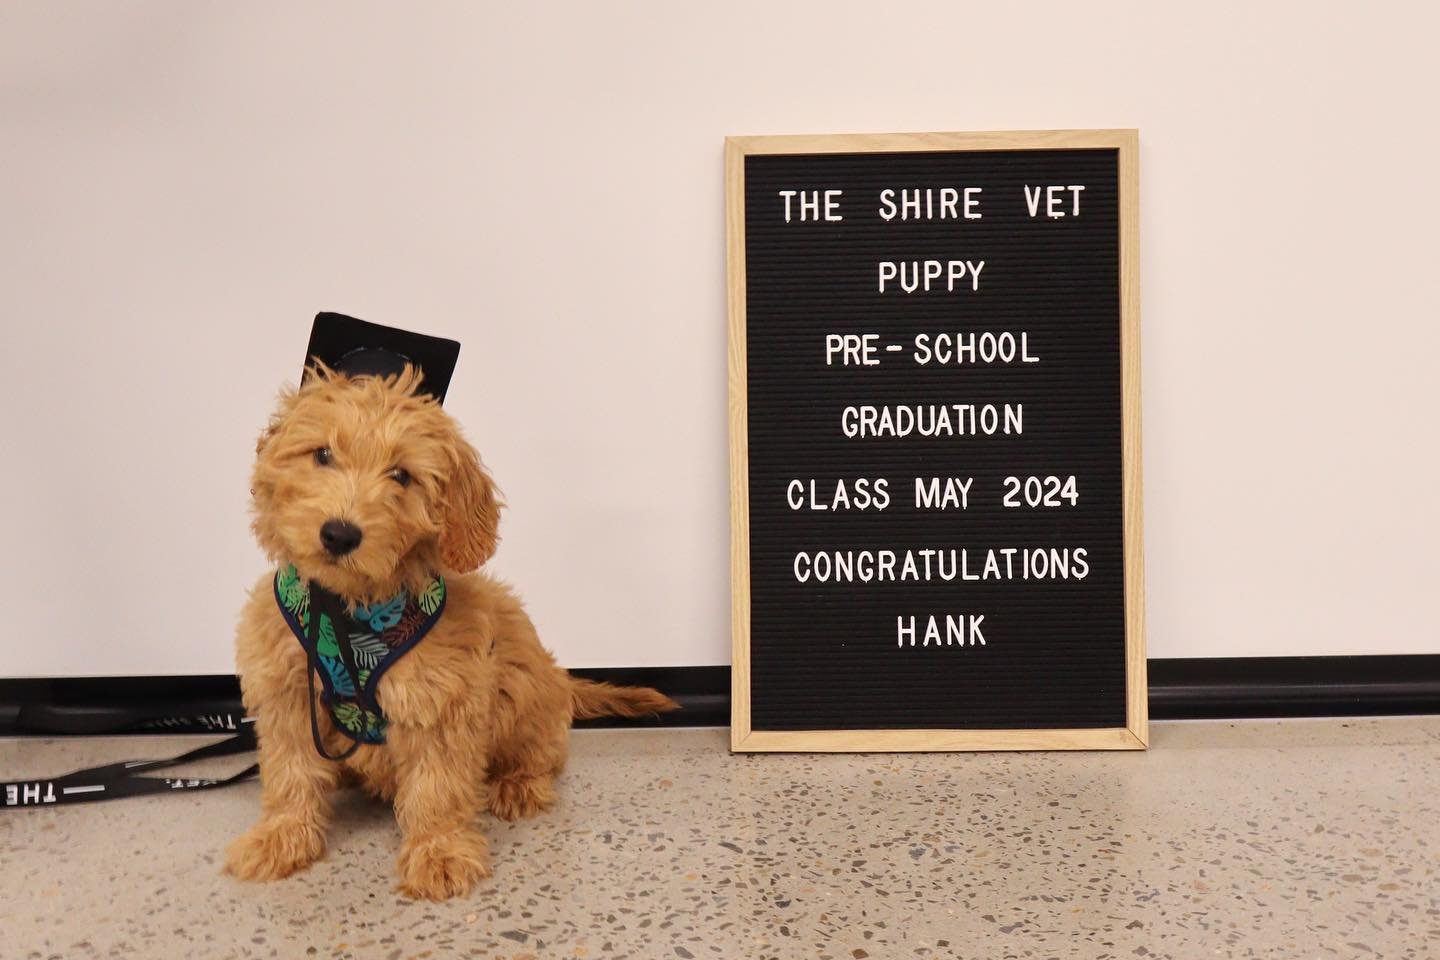 Another group of clever puppies have graduated puppy preschool this week 🥳 
Congratulations:
🎓 Hank
🎓 Gus
🎓 Fleur
🎓 Nala
🎓 Beau